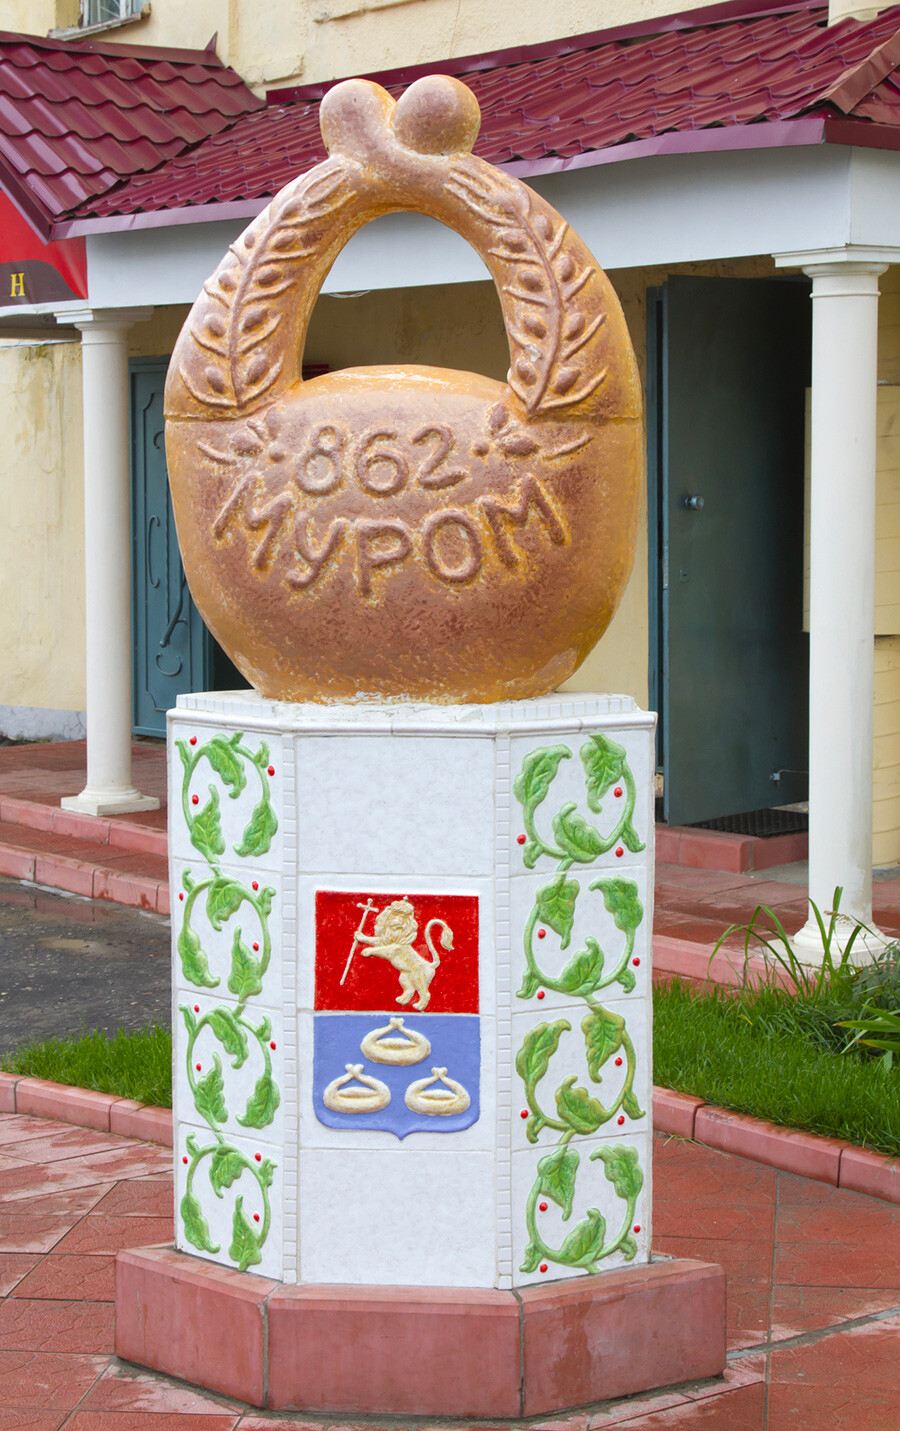 Catherine the Great was so enthralled by this bread that she approved its use as part of the official emblem of the city of Murom. 